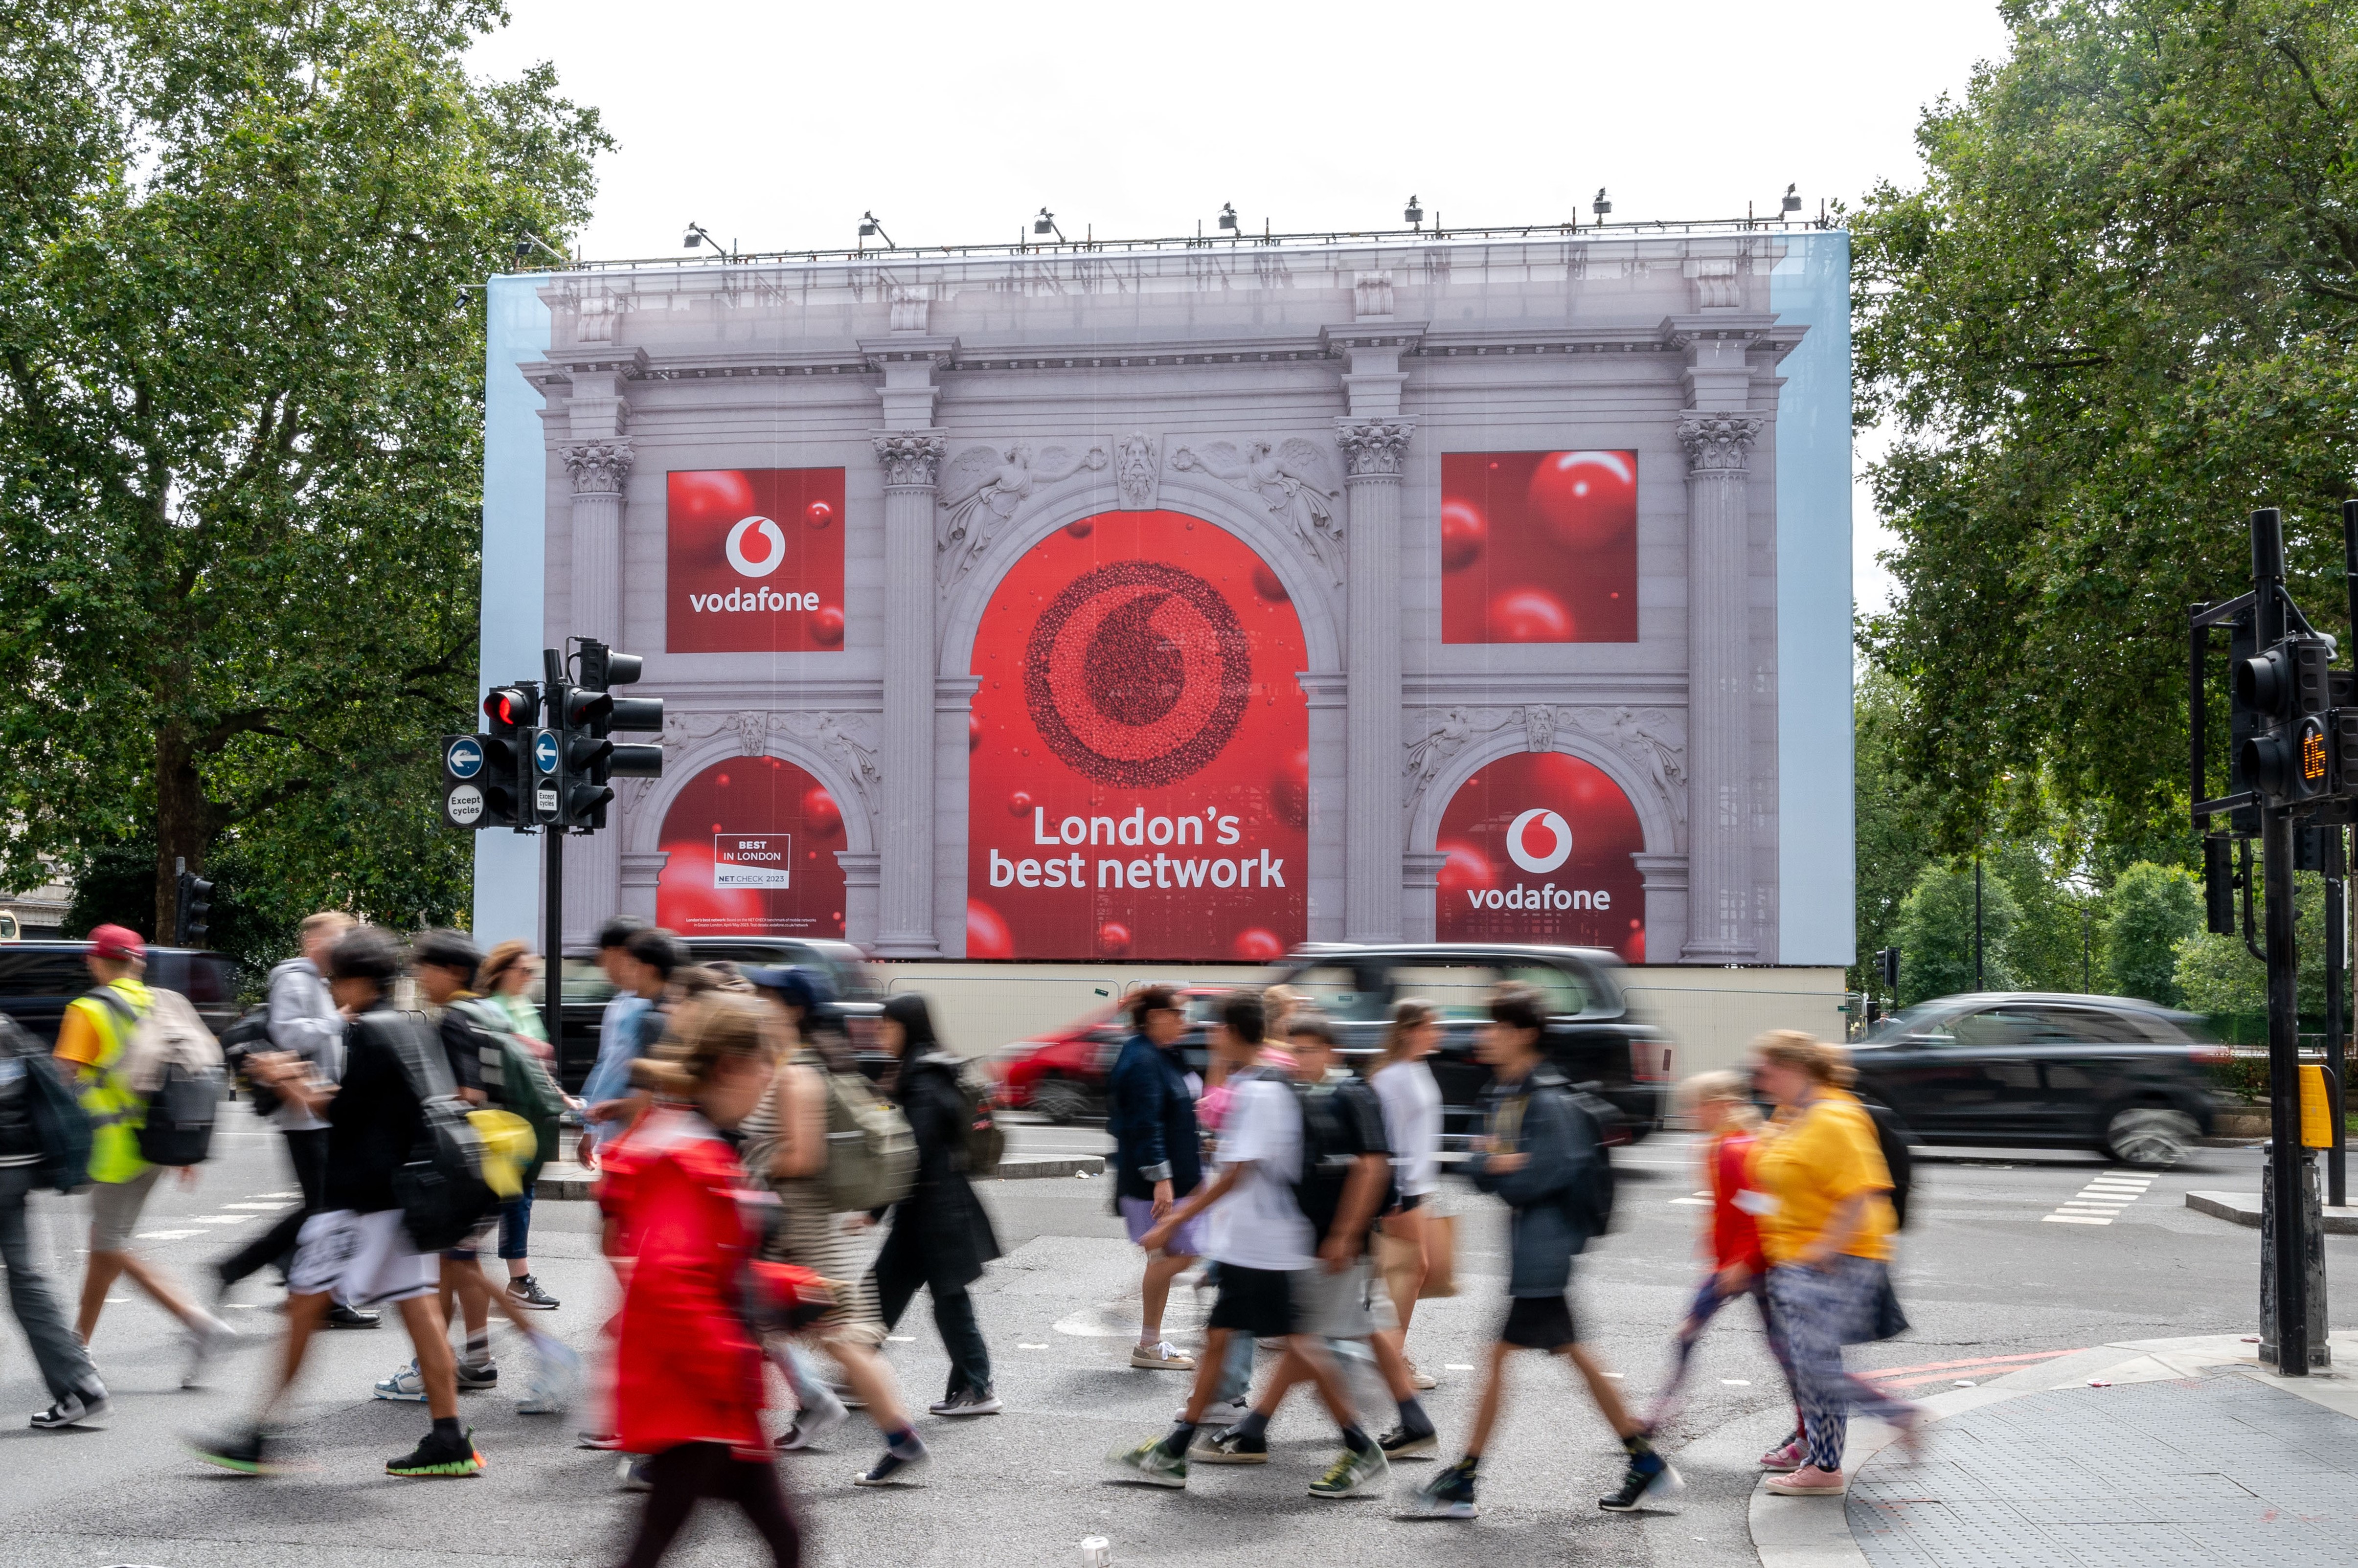 Vodafone celebrates Best in London network award with OOH wrap of Marble arch